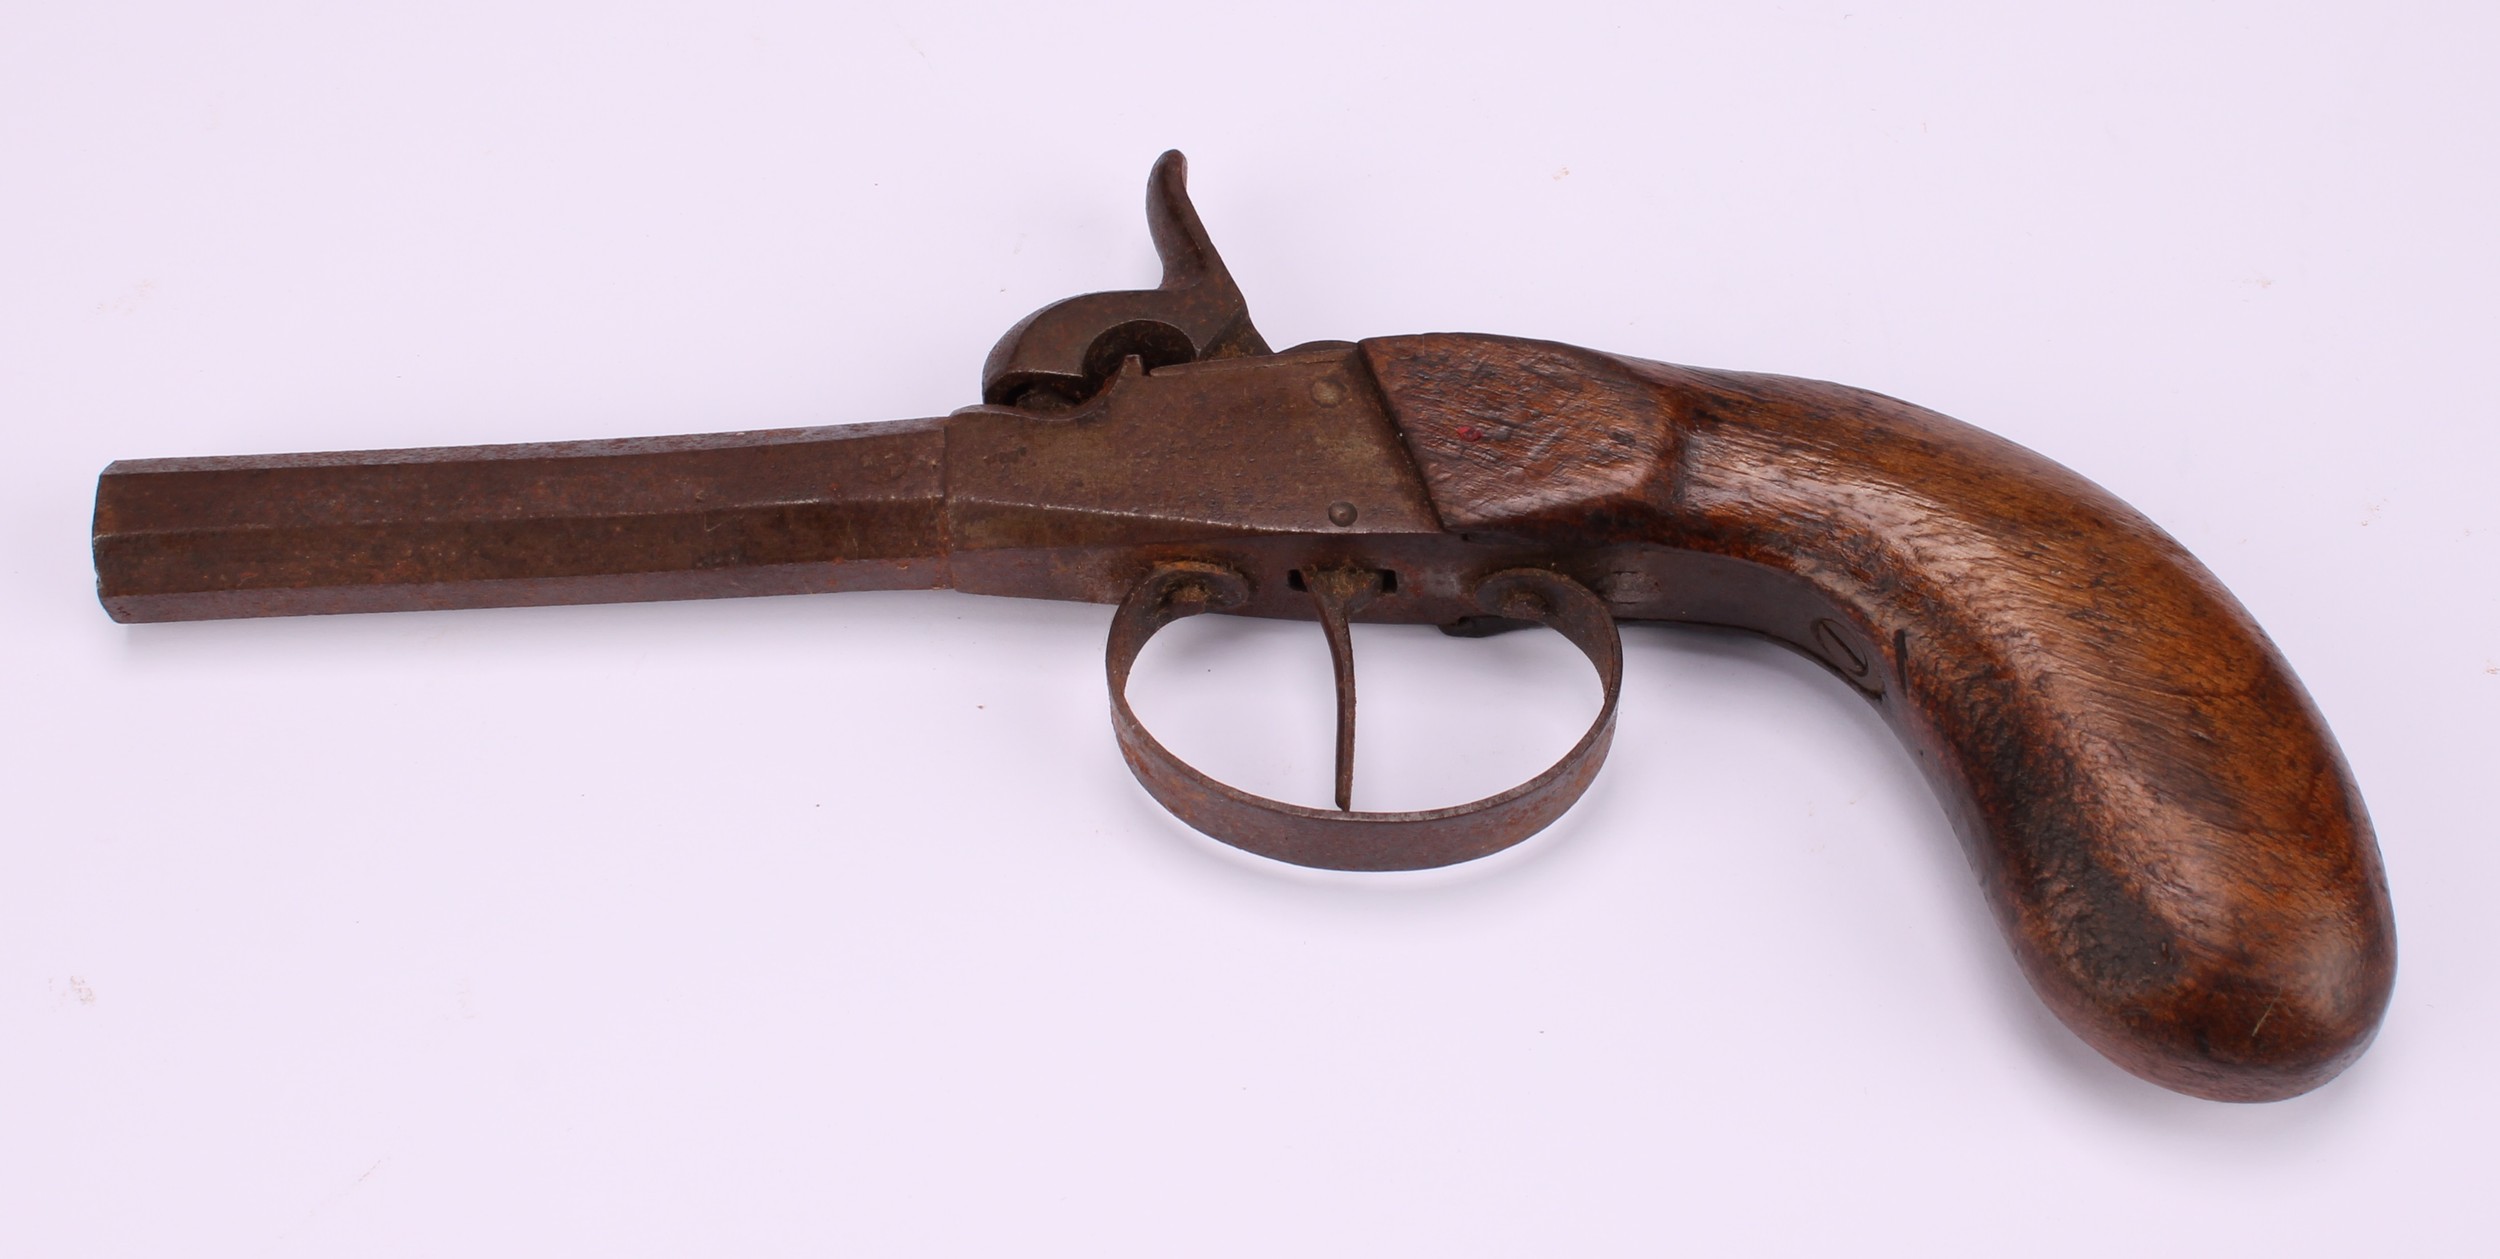 A 19th century percussion belt pistol, 13.5cm octagonal barrel, integral ramrod, chequered grip, - Image 8 of 10